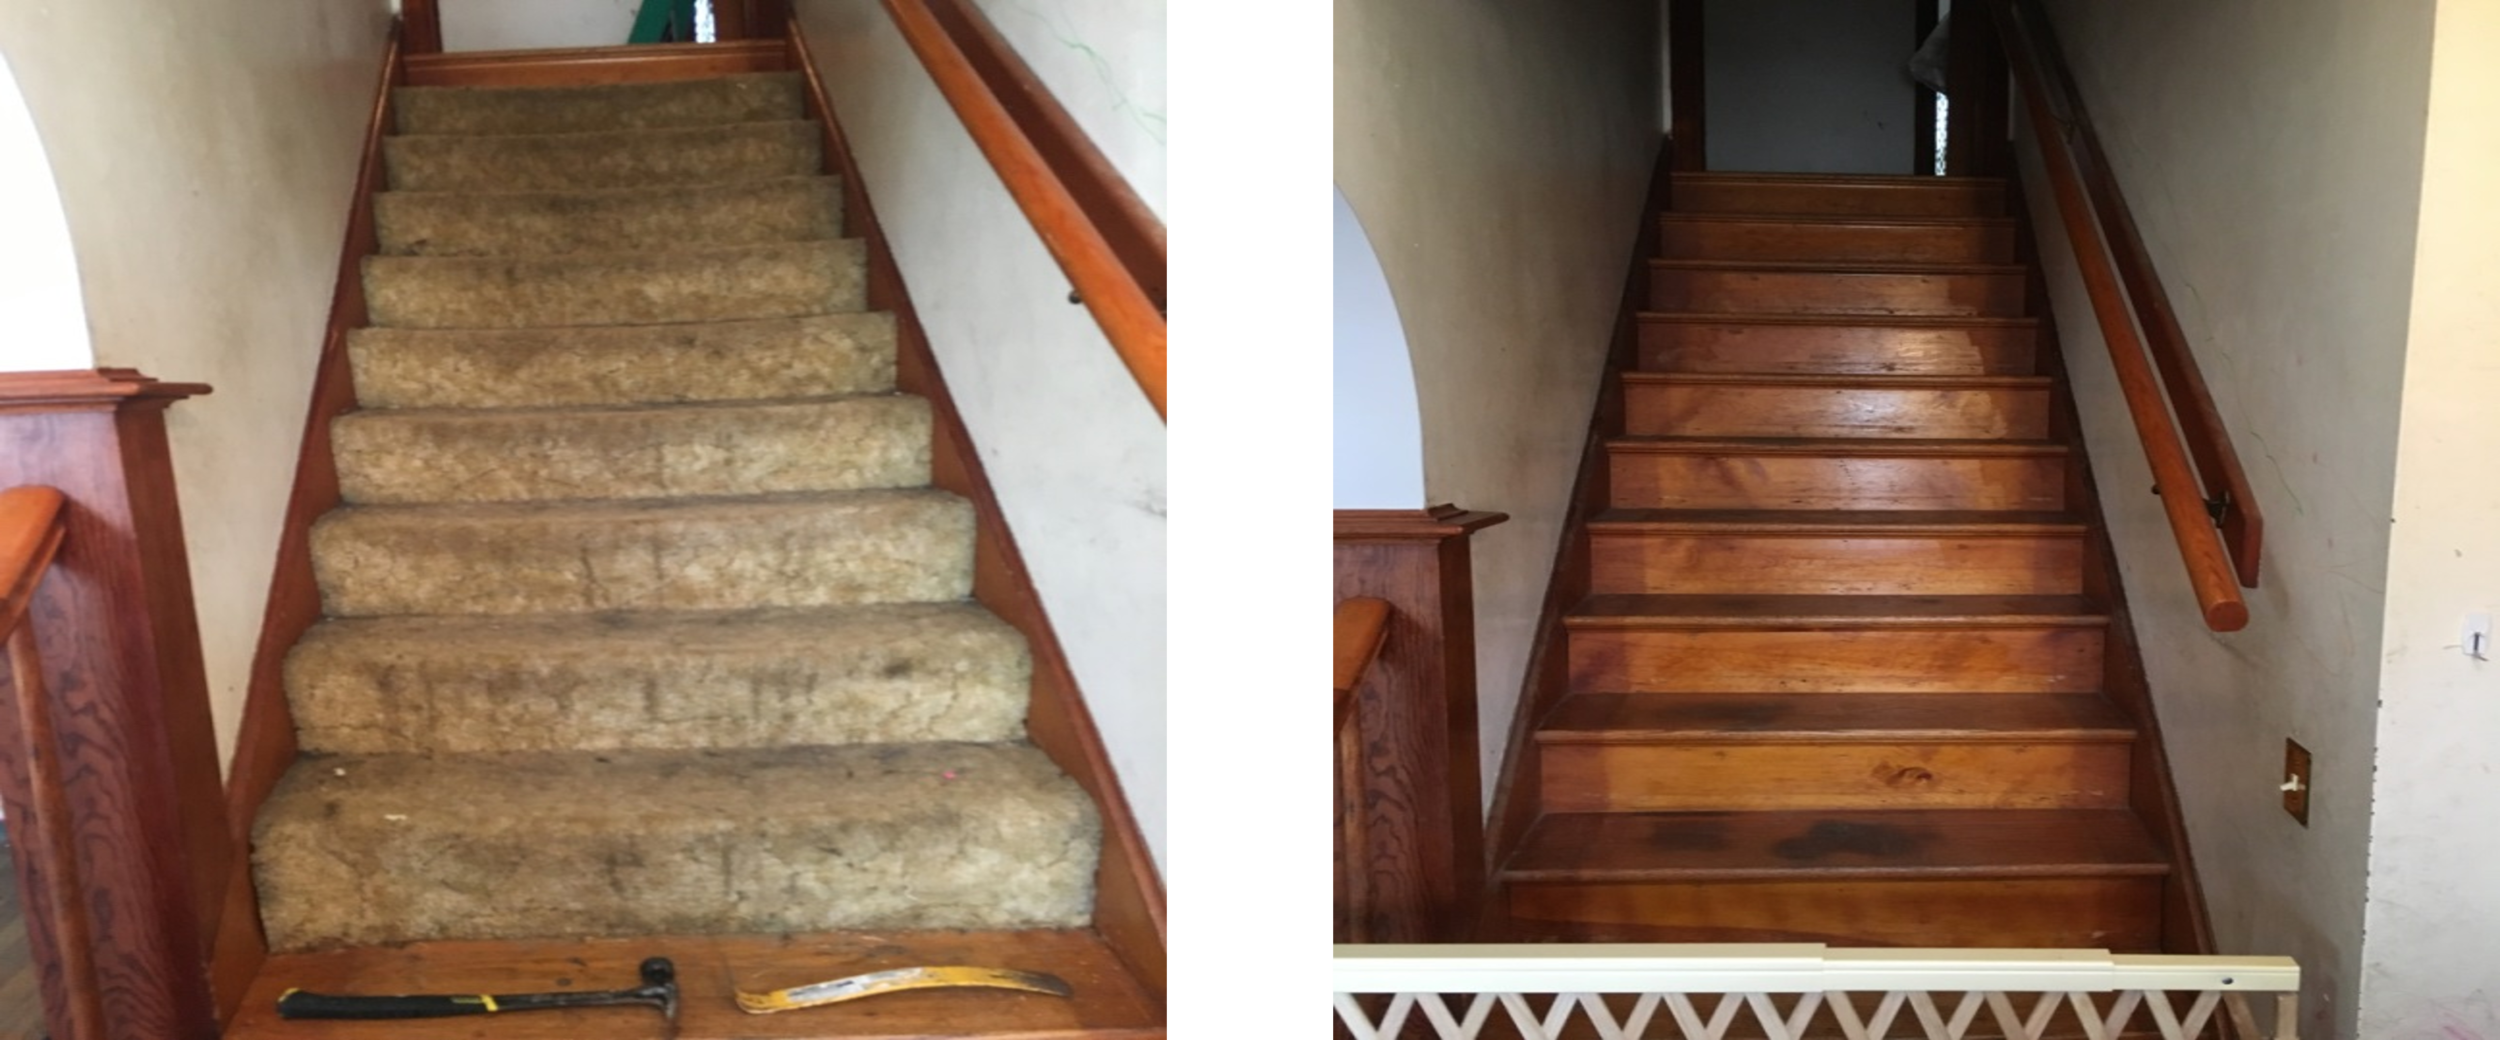  Carpeted staircase removed as an asthma trigger 